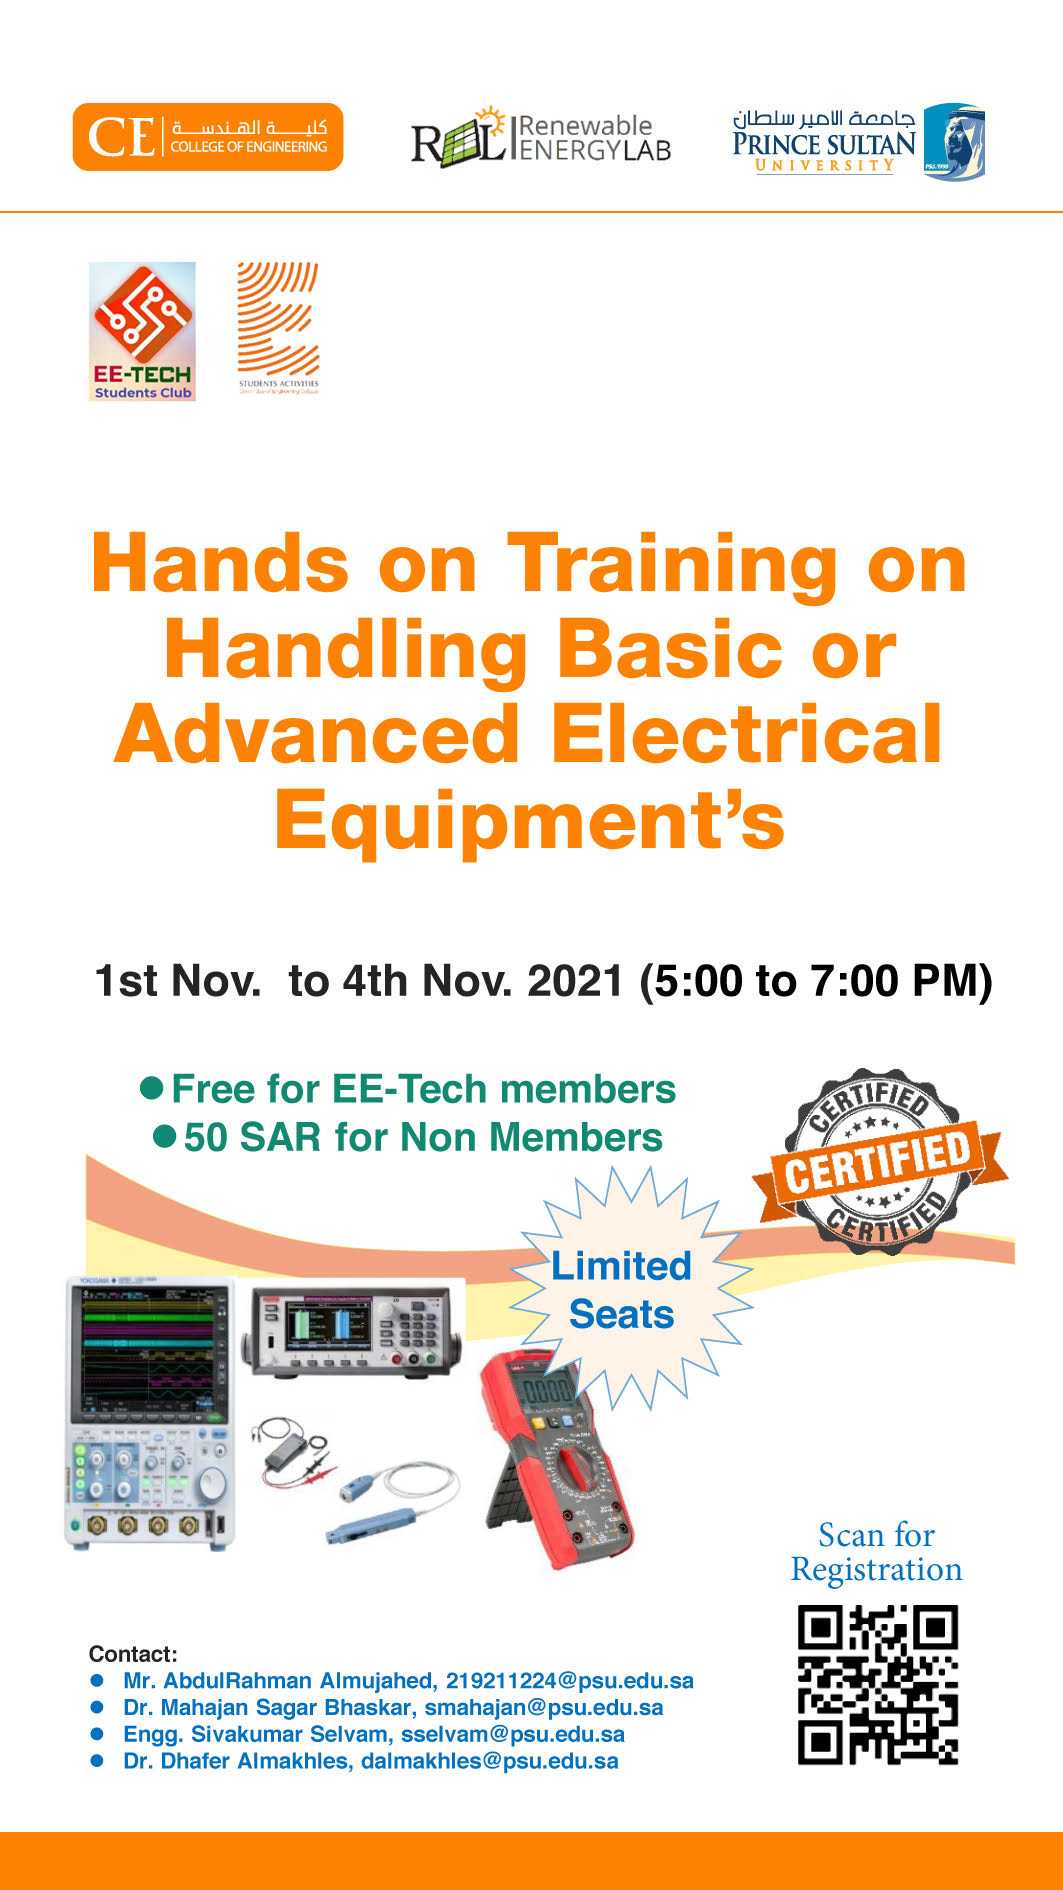 HANDS-ON TRAINING ON HANDLING BASIC / ADVANCED ELECTRICAL EQUIPMENTS